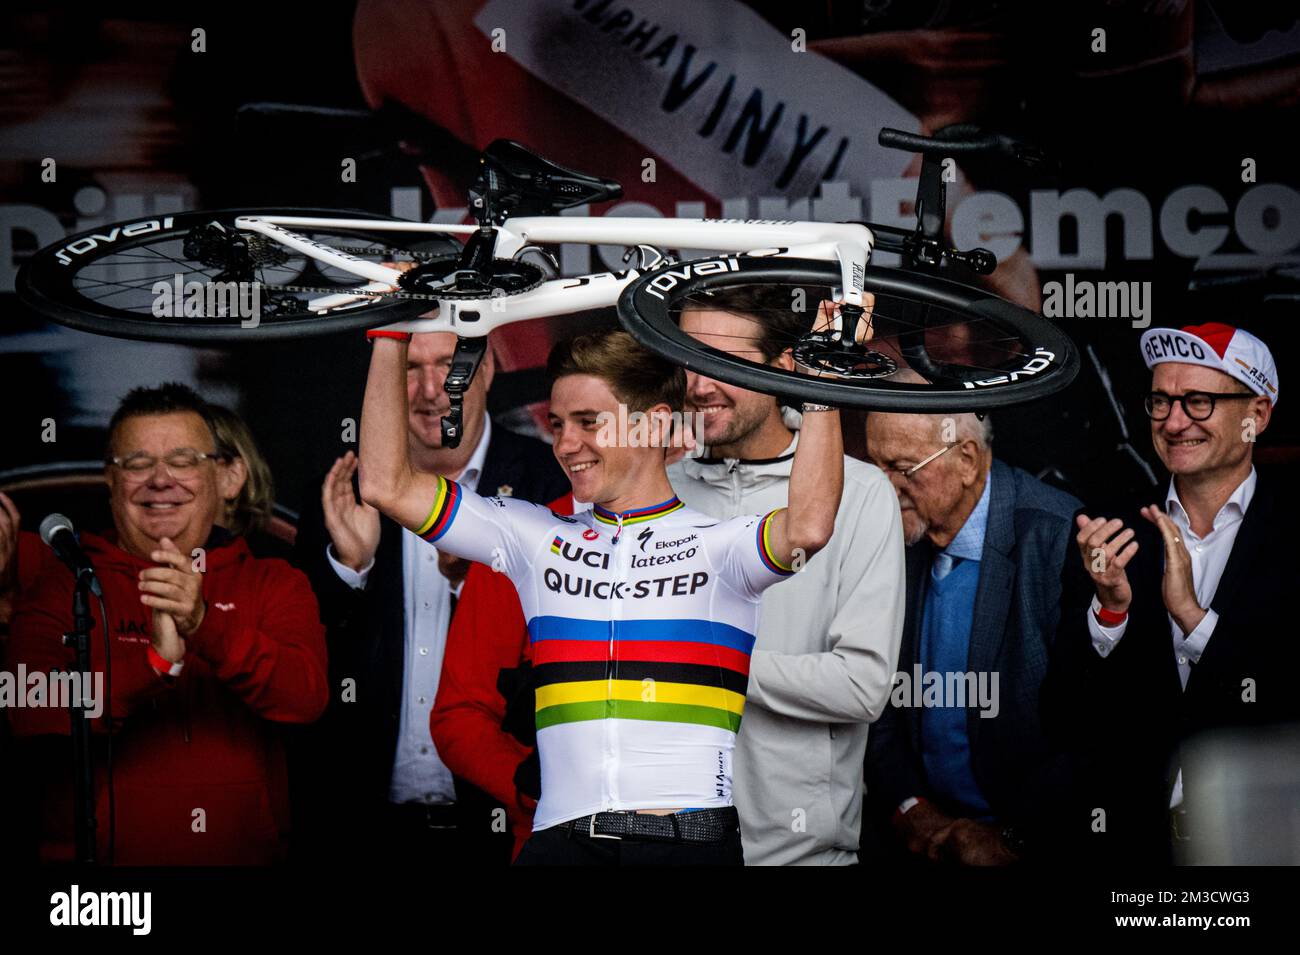 Belgian Remco Evenepoel pictured during the celebration of world champion Evenepoel in Dilbeek and start of a big bike ride to Brussels, Sunday 02 October 2022. 22 years old Evenepoel, from Schepdael, Dilbeek, became world champion after a great season with a win at the Vuelta, first Belgian in 44 years to win a big tour. BELGA PHOTO JASPER JACOBS Stock Photo